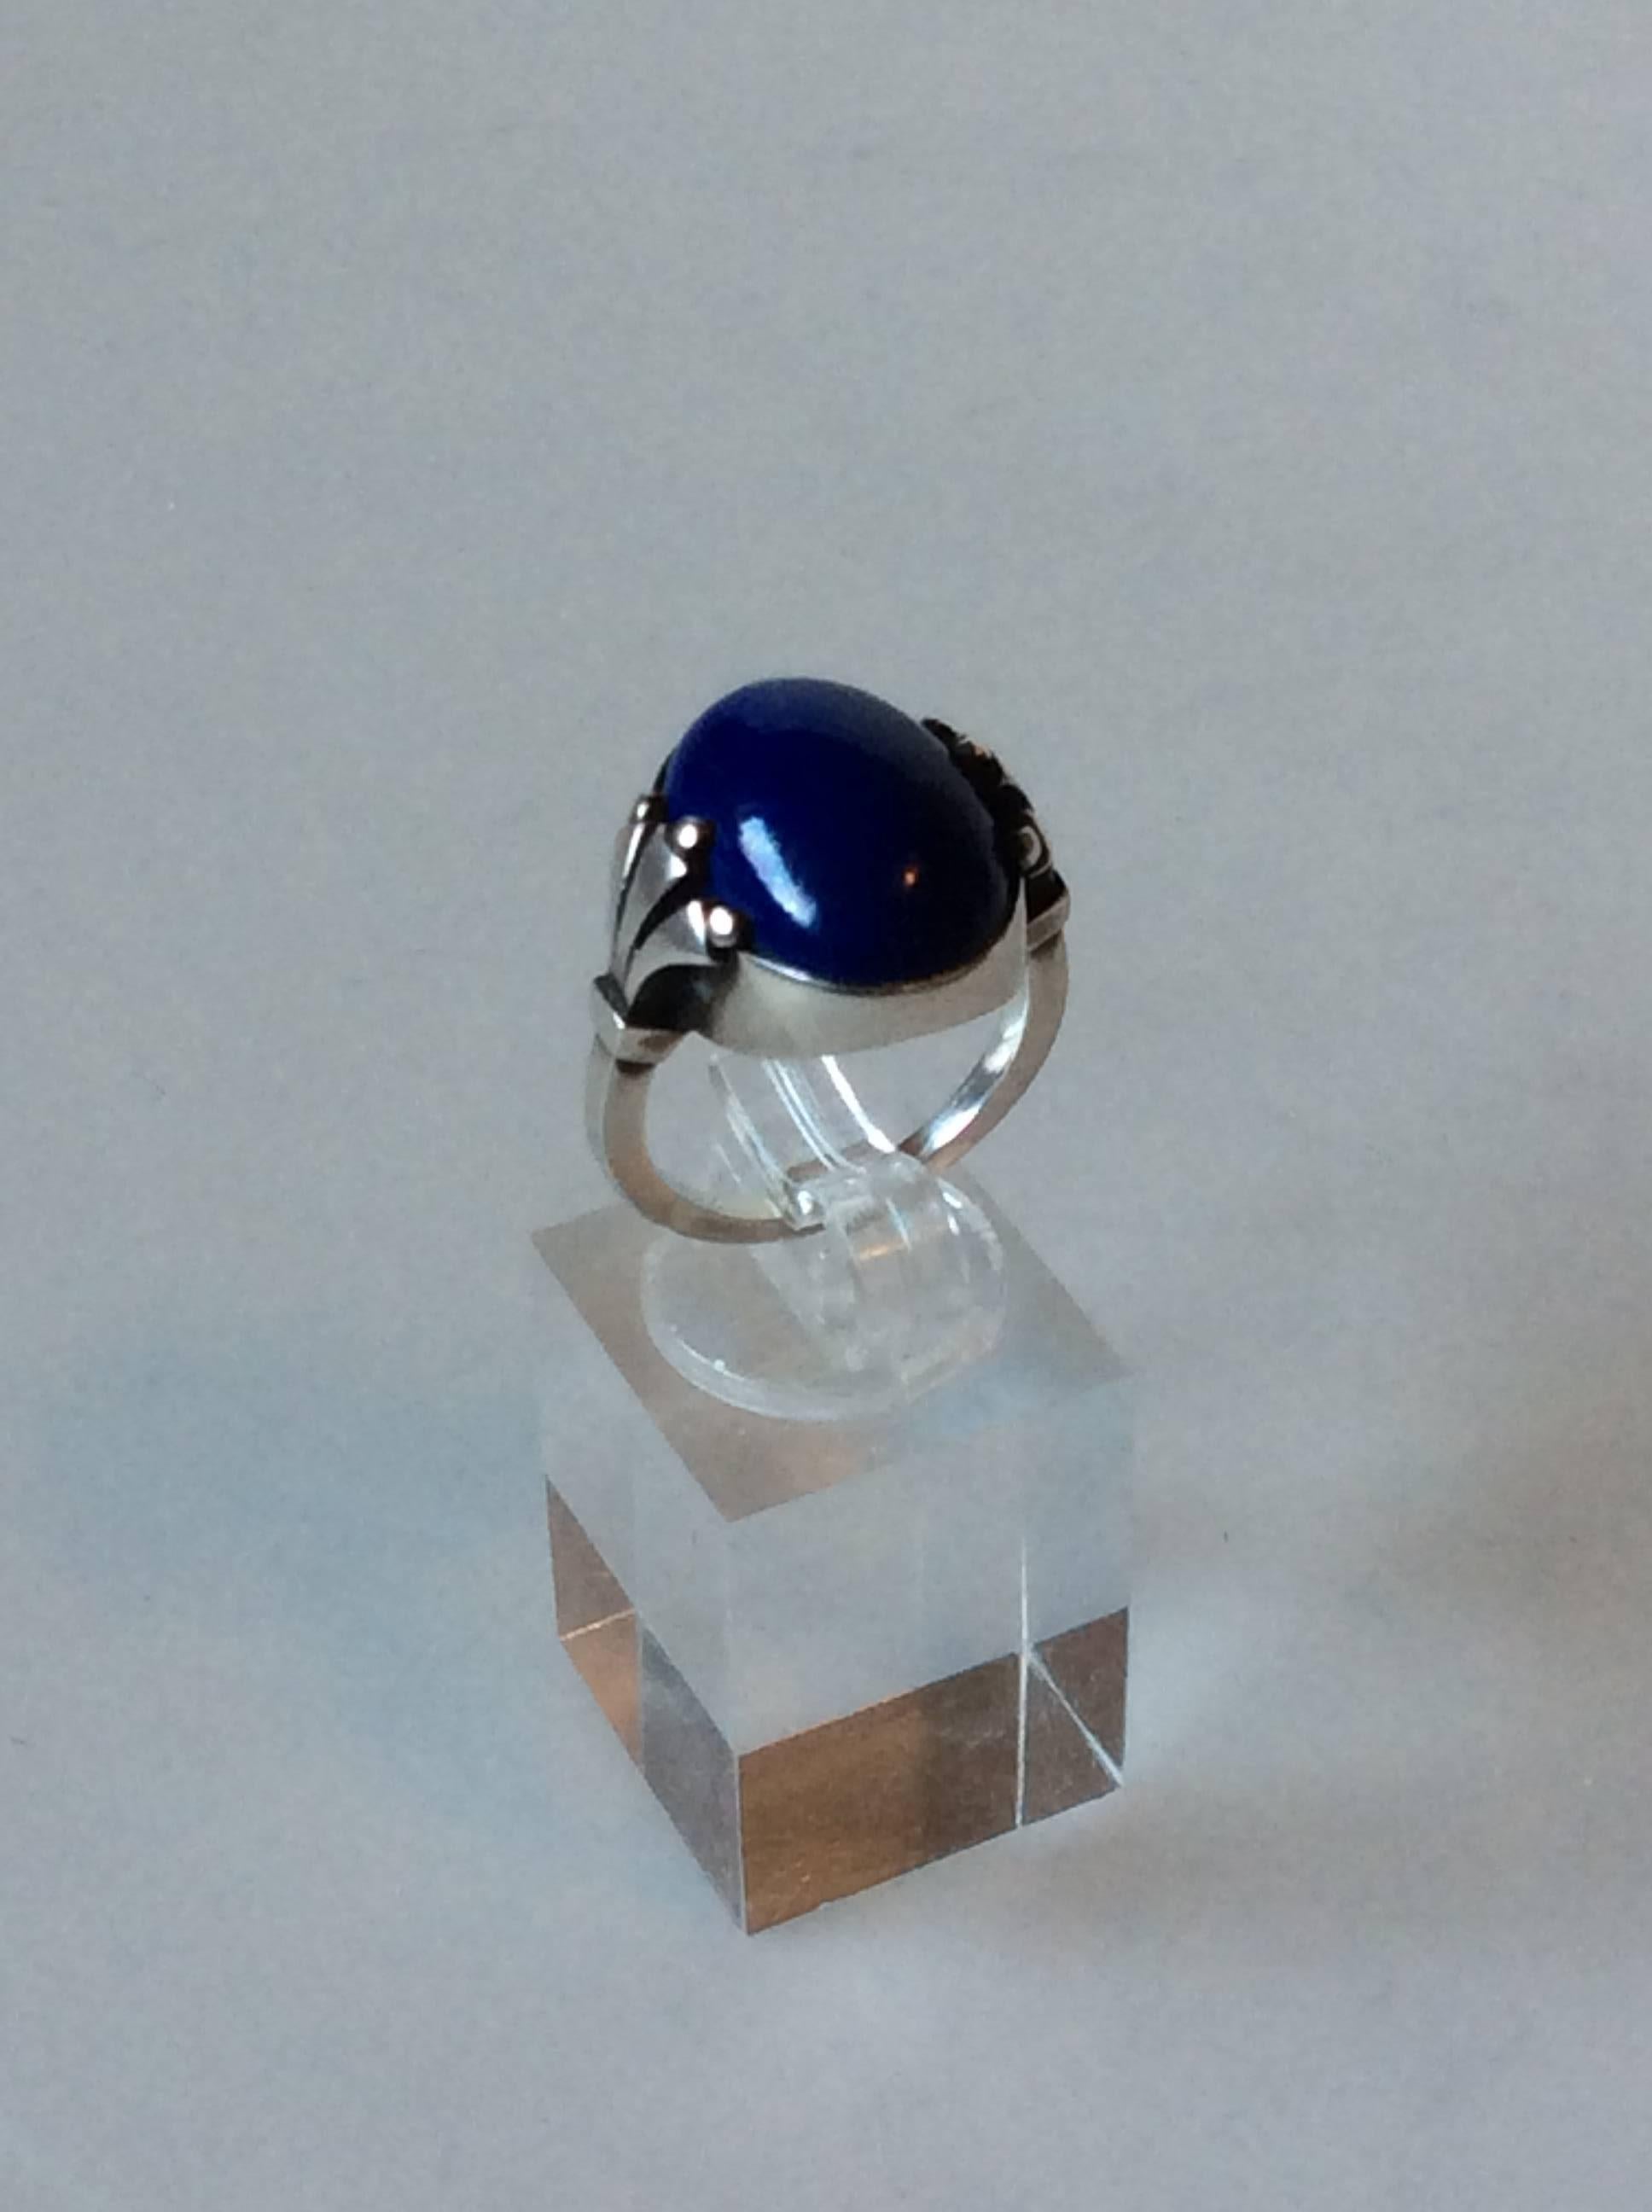 Georg Jensen Sterling Silver Ring with Lapis Lazuli No. 51

Ring size is 54 or US 6 3/4

Weight is: 7,28 grams / 0,257 oz.

Post 1945 mark